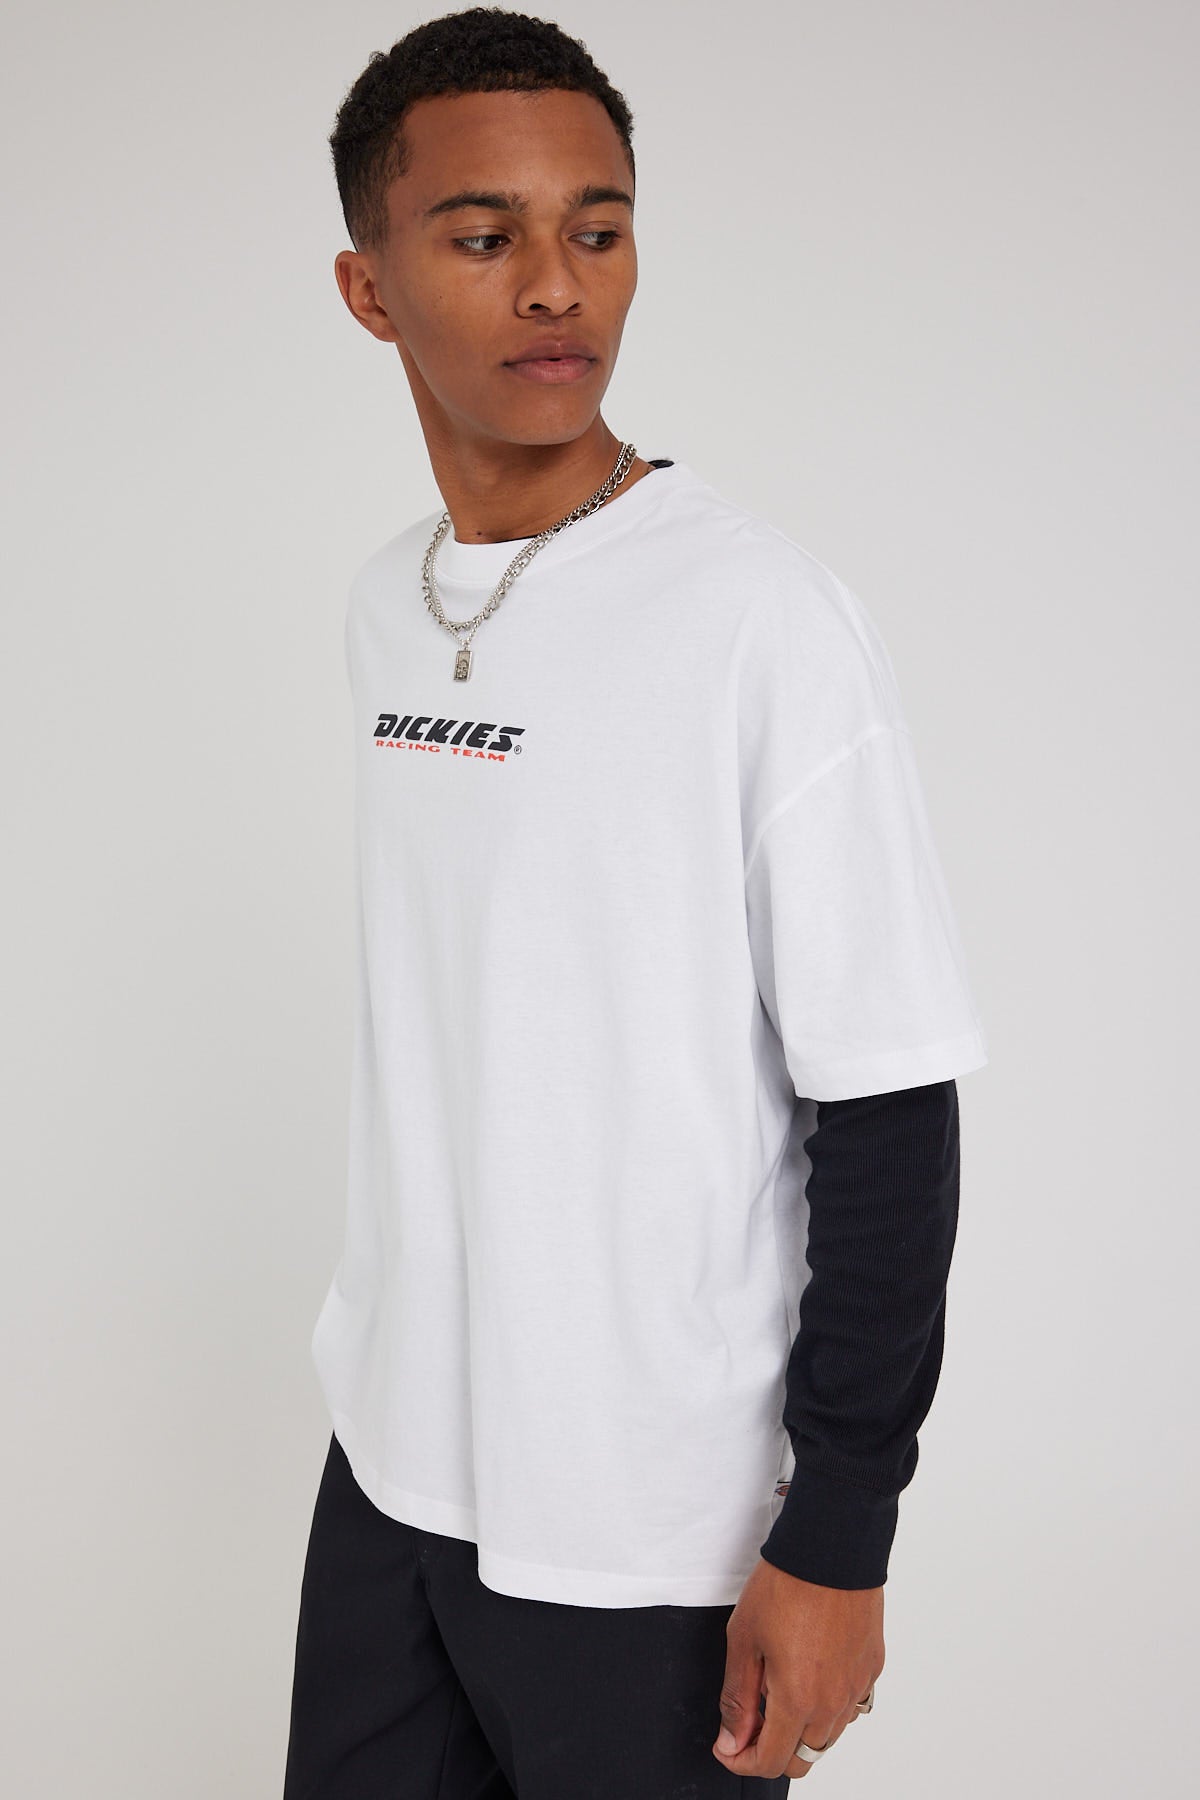 Dickies Delivered 330 Tee White